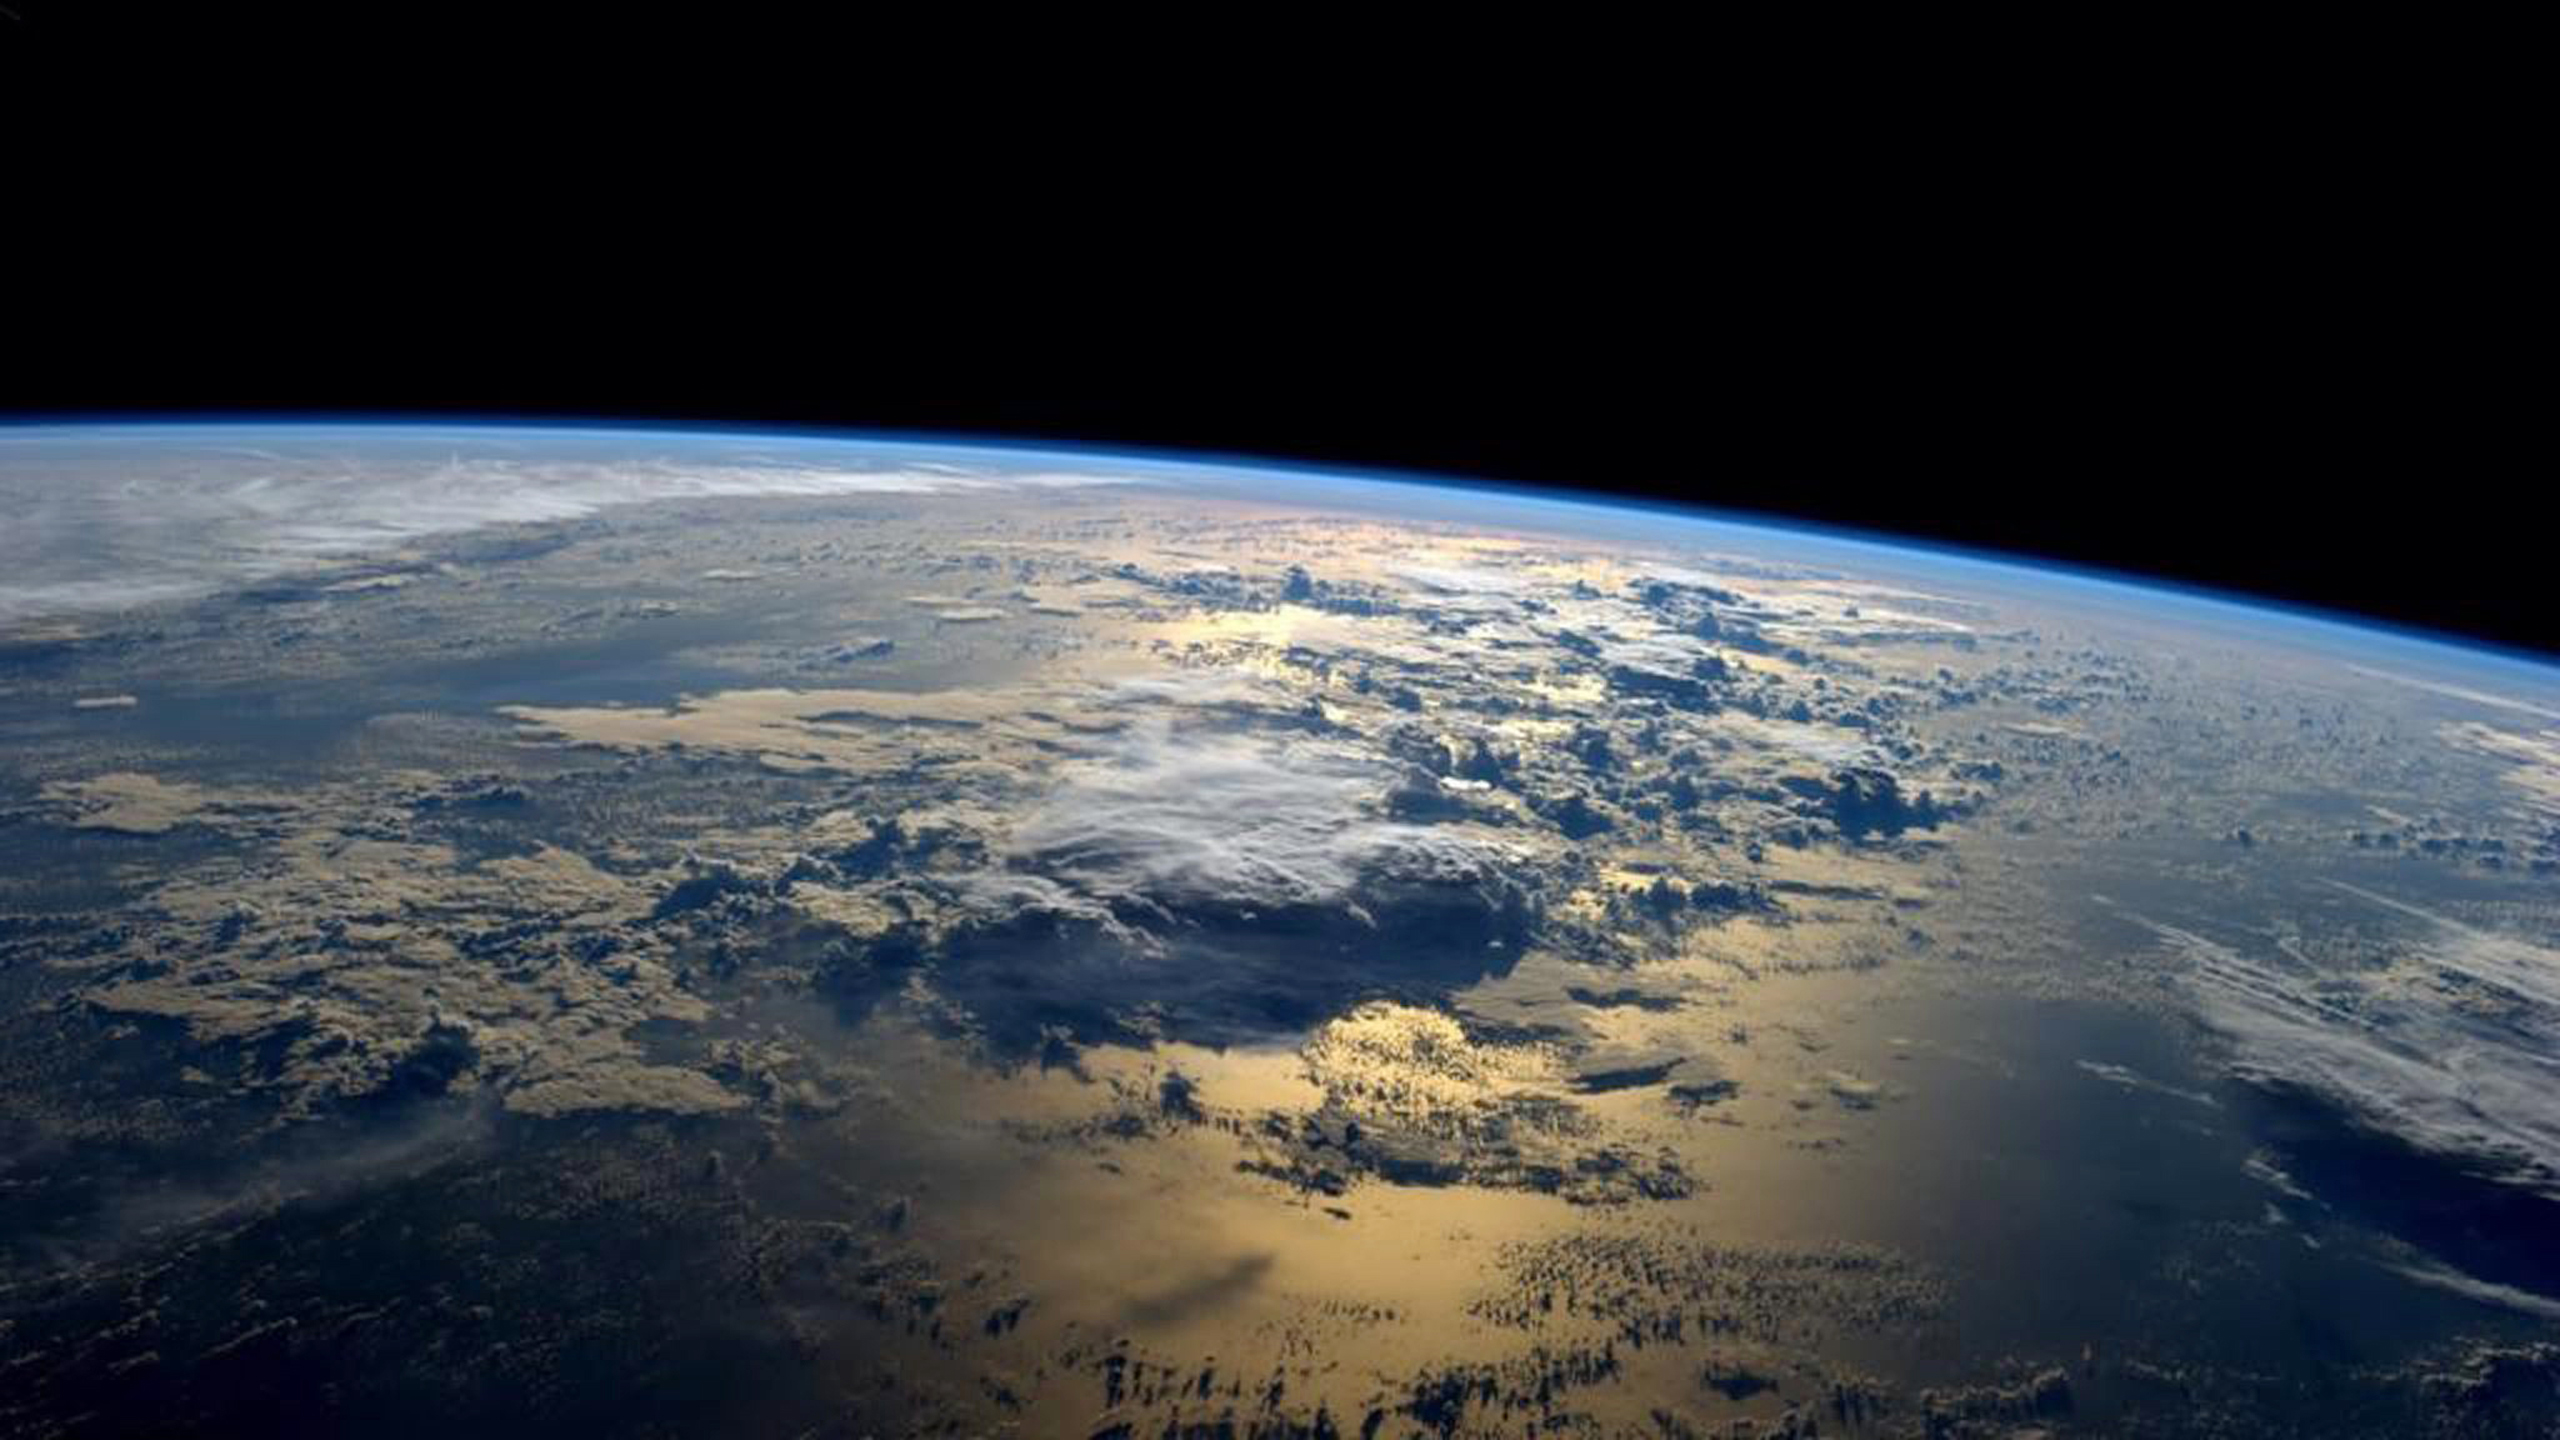 Earth Seen From The International Space Station, Wallpaper13.com